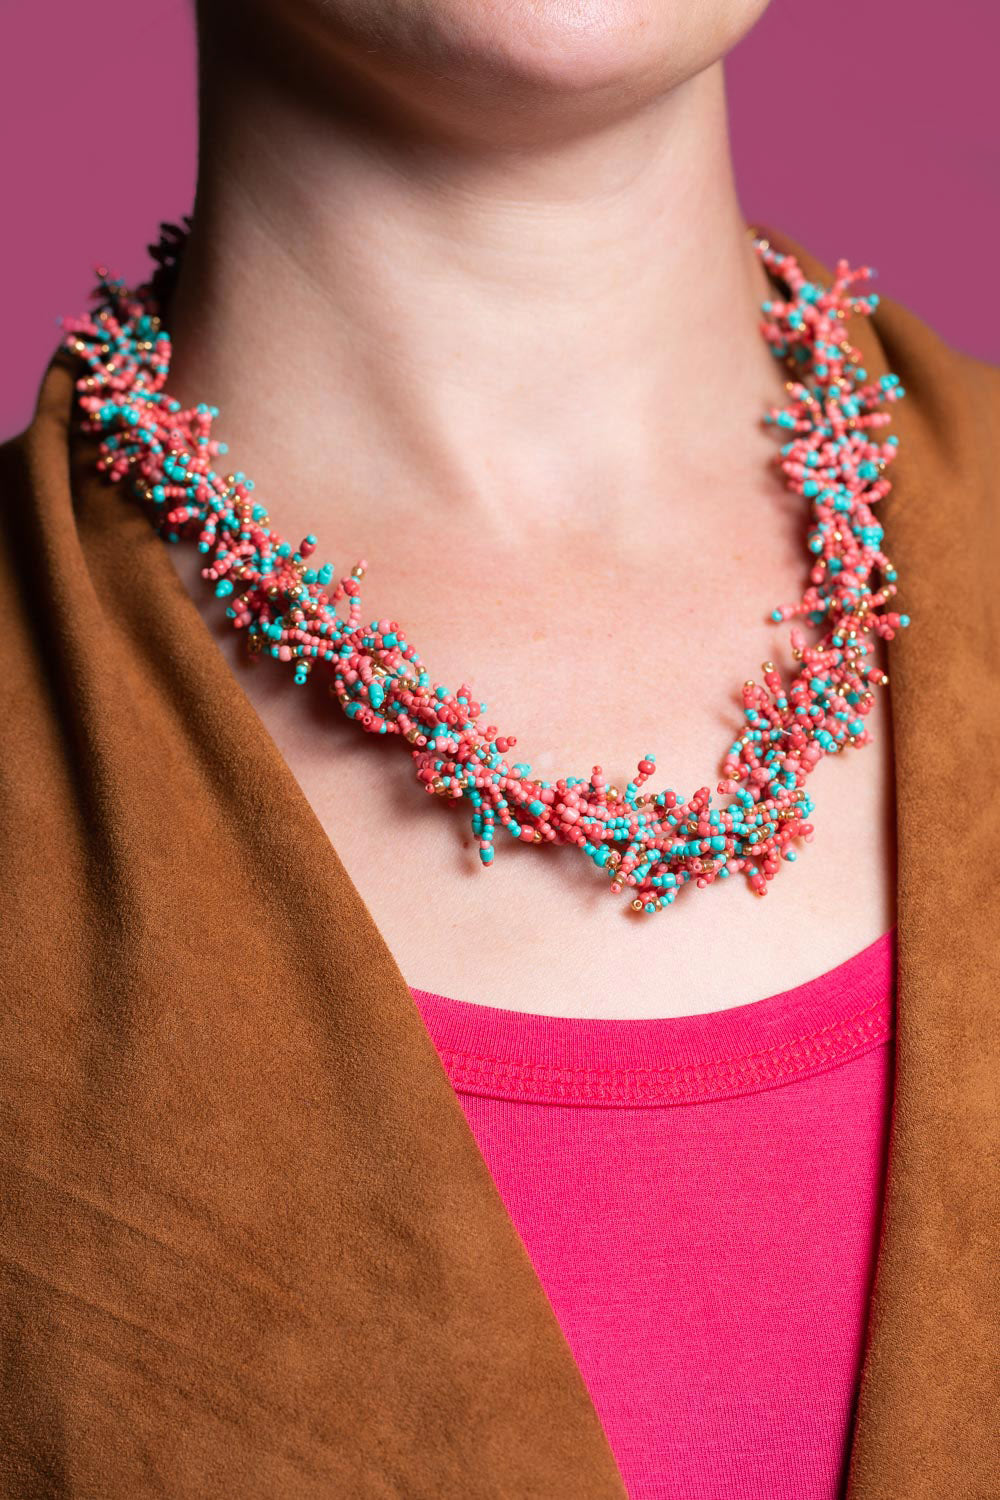 Type 3 Coral Sea Necklace/Earring Set